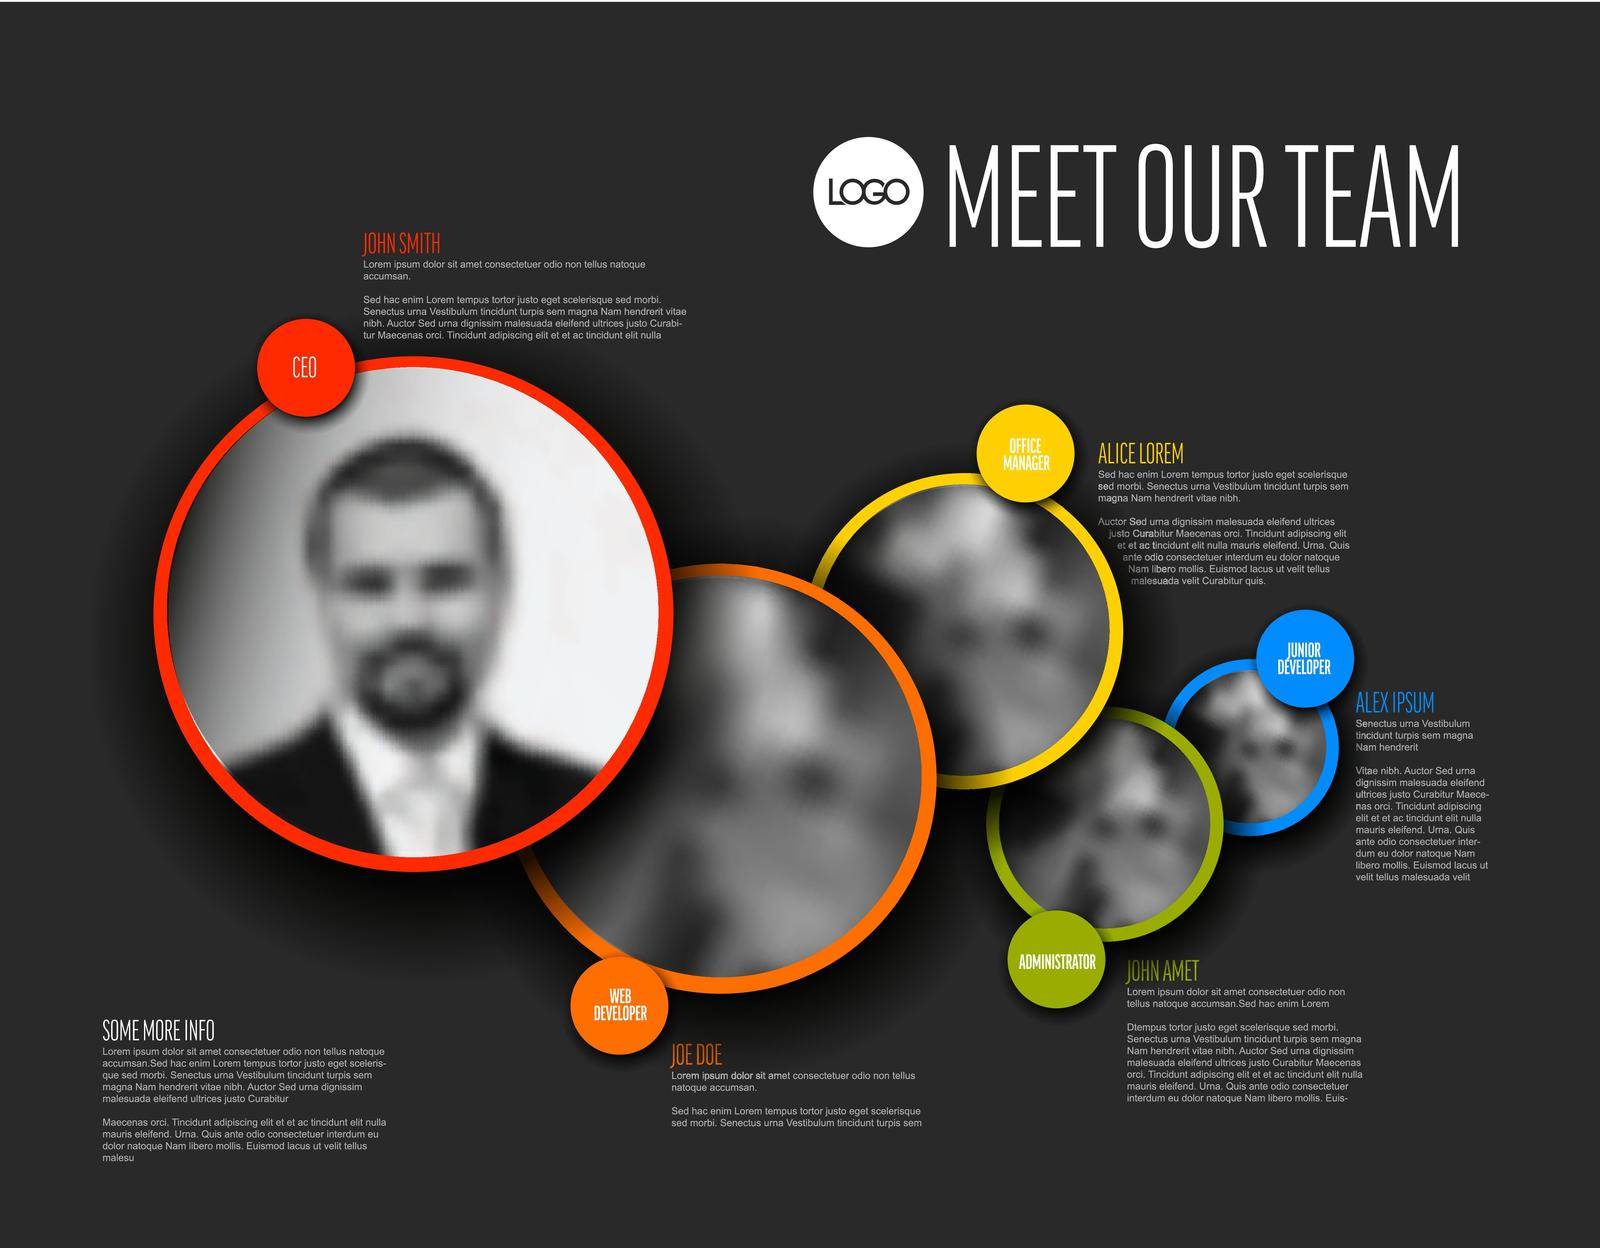 Dark company team presentation template with team profile photos circle placeholders with some sample text about each team member - photo team members placeholders with descriptions